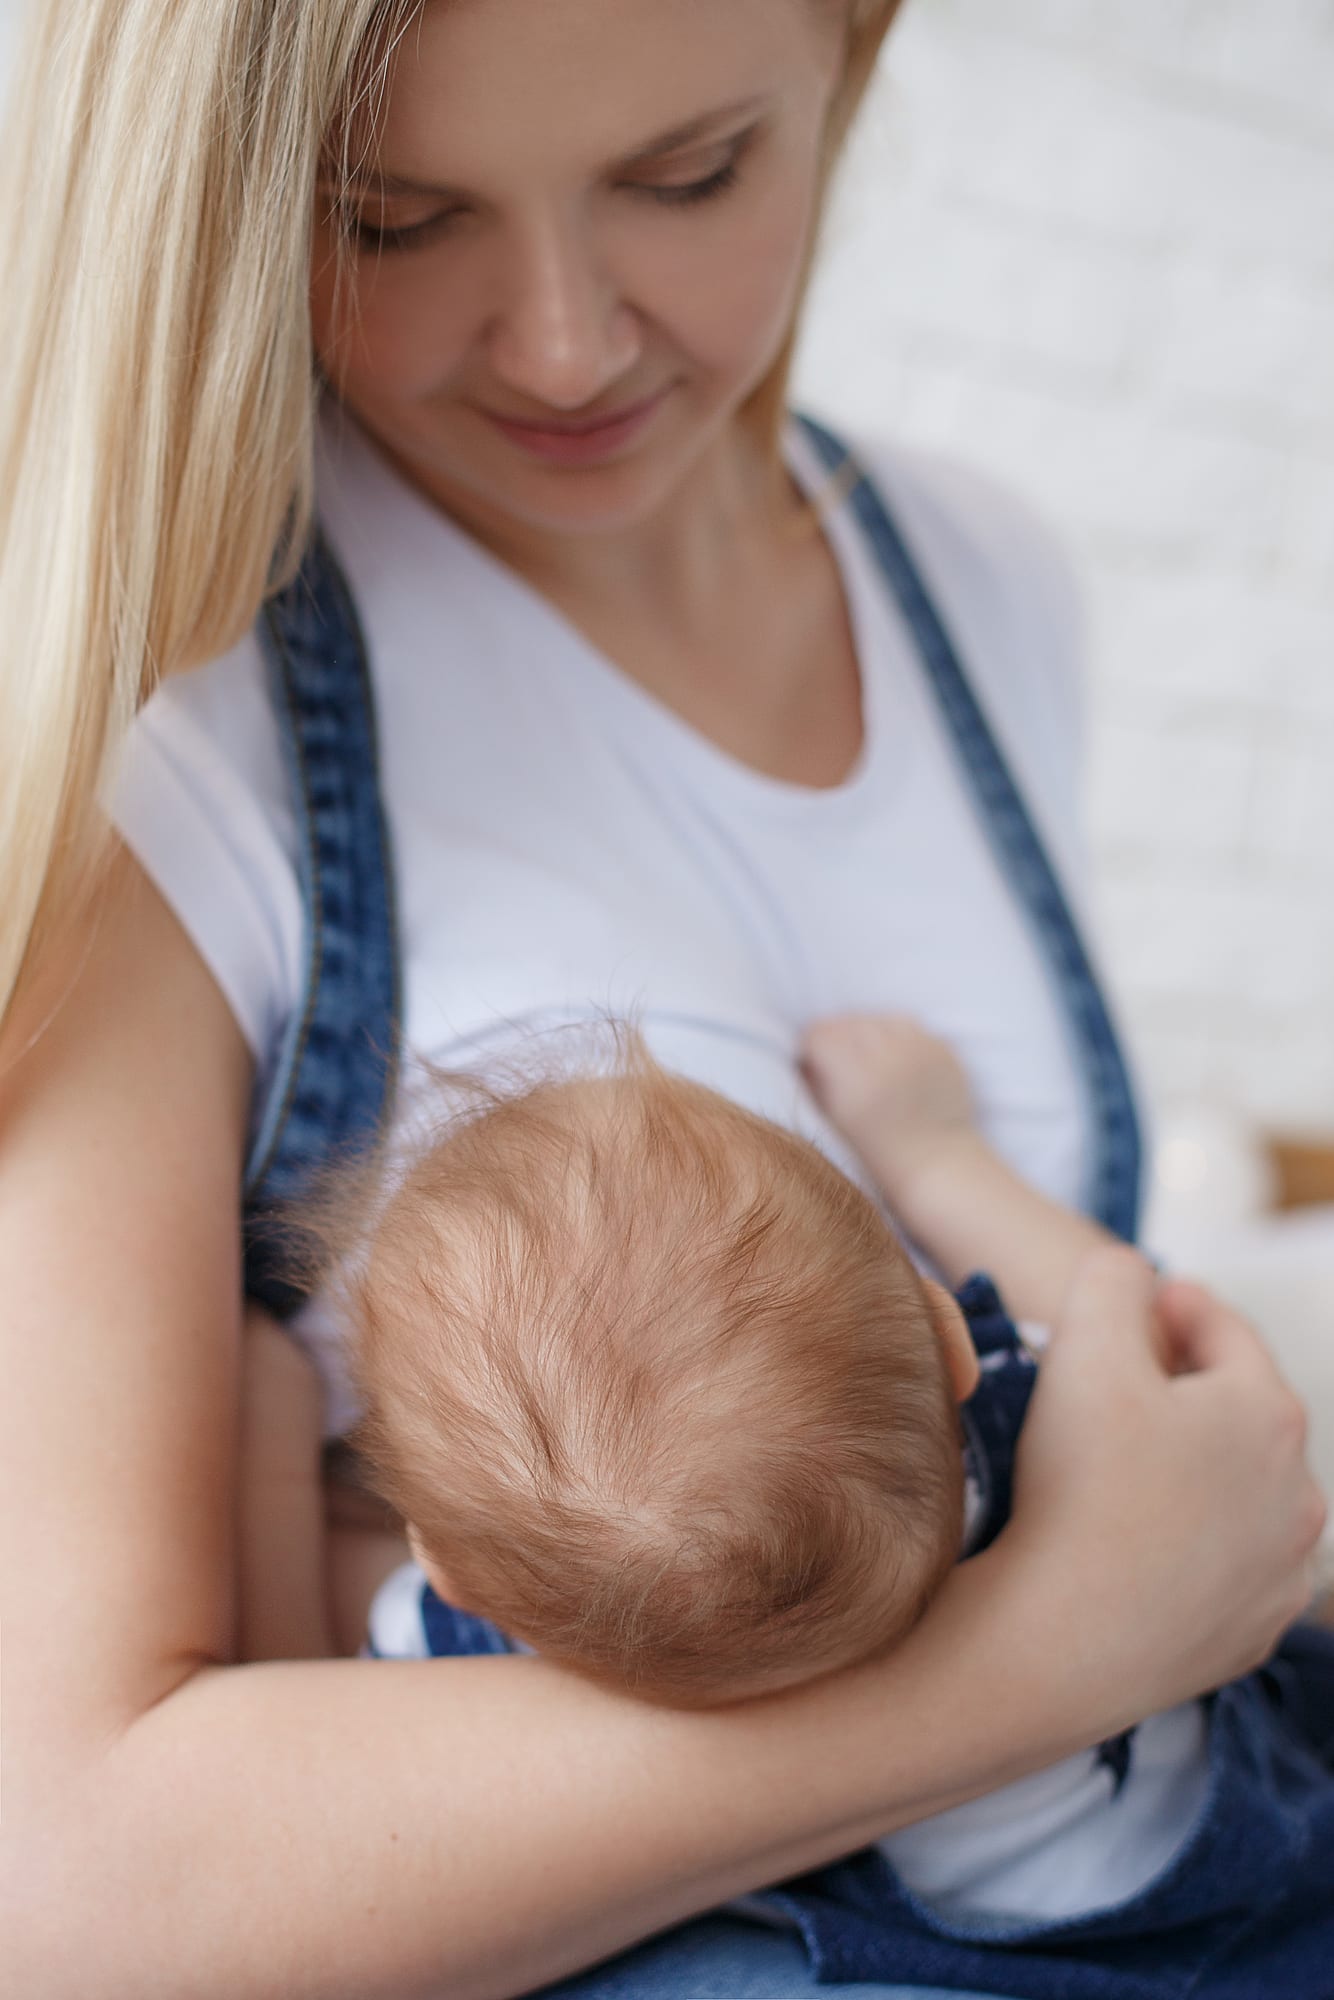 Breastfeeding tips that are a game changer #breastfeedingtips #breastfeedinghacks